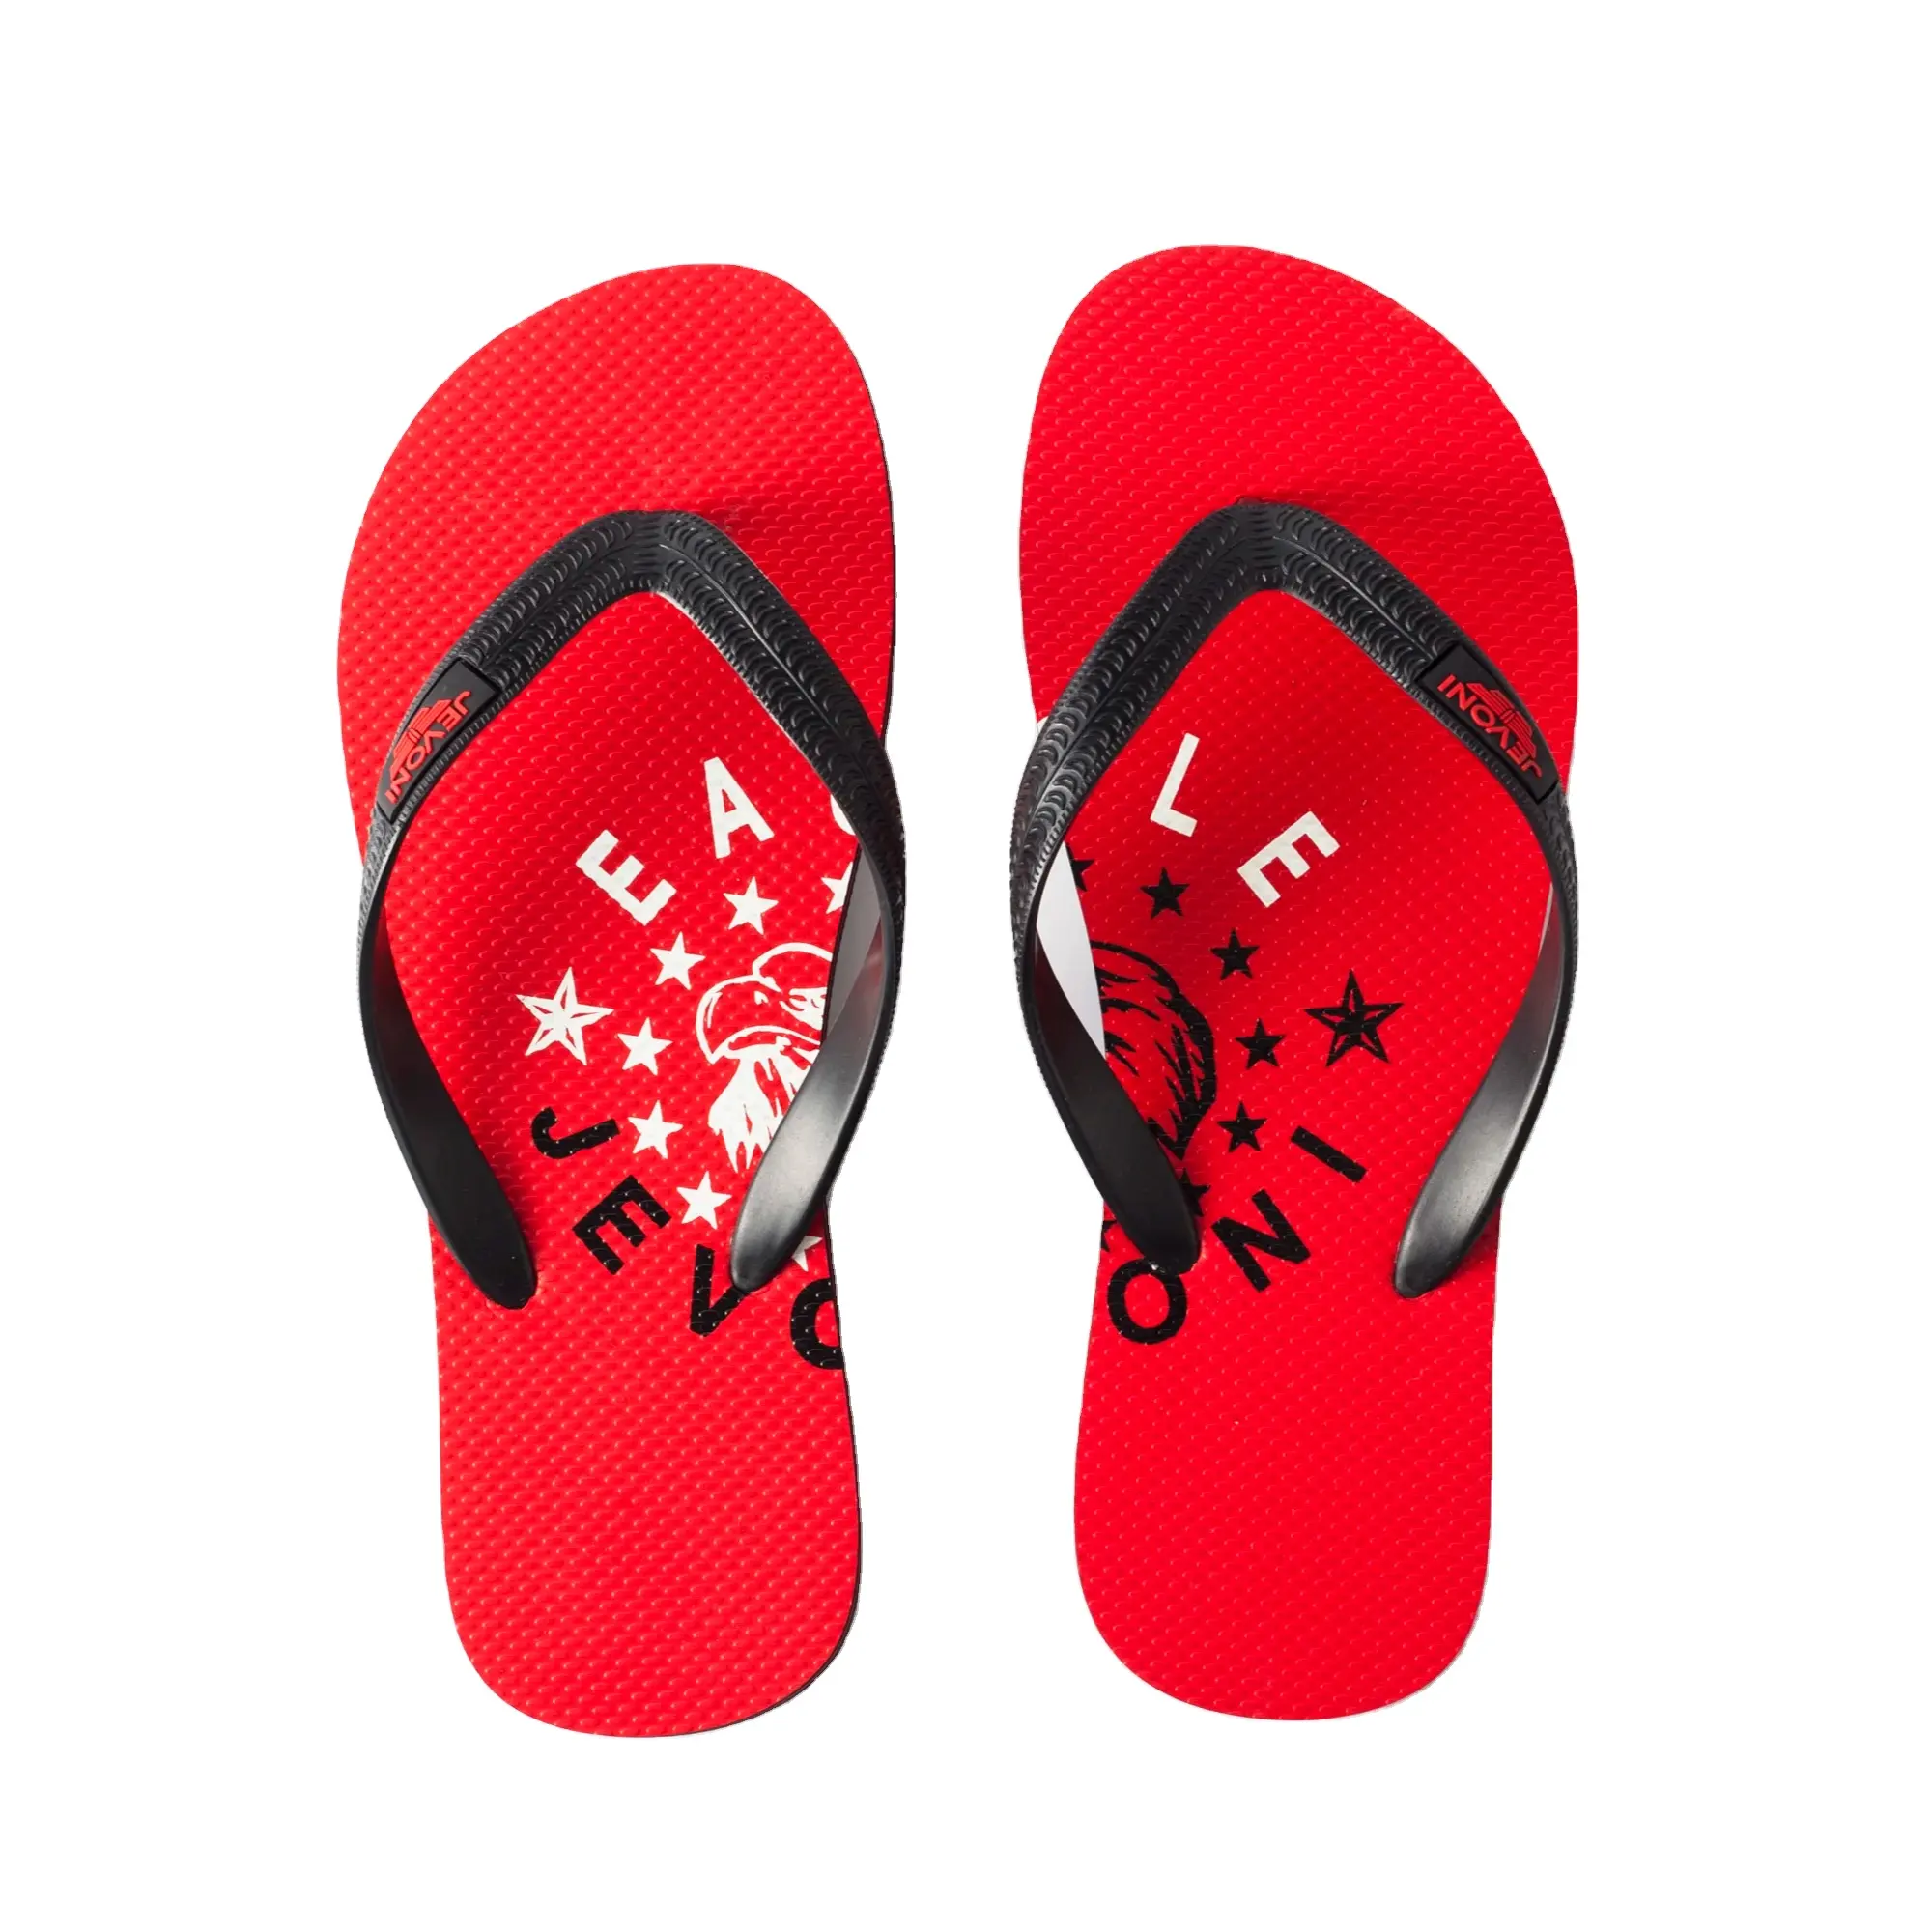 Best Selling Natural Rubber Men's Slipper Flip Flop Personalized with PVC Insole Anti-Slip Fashionable Beach Indoor Summer Use